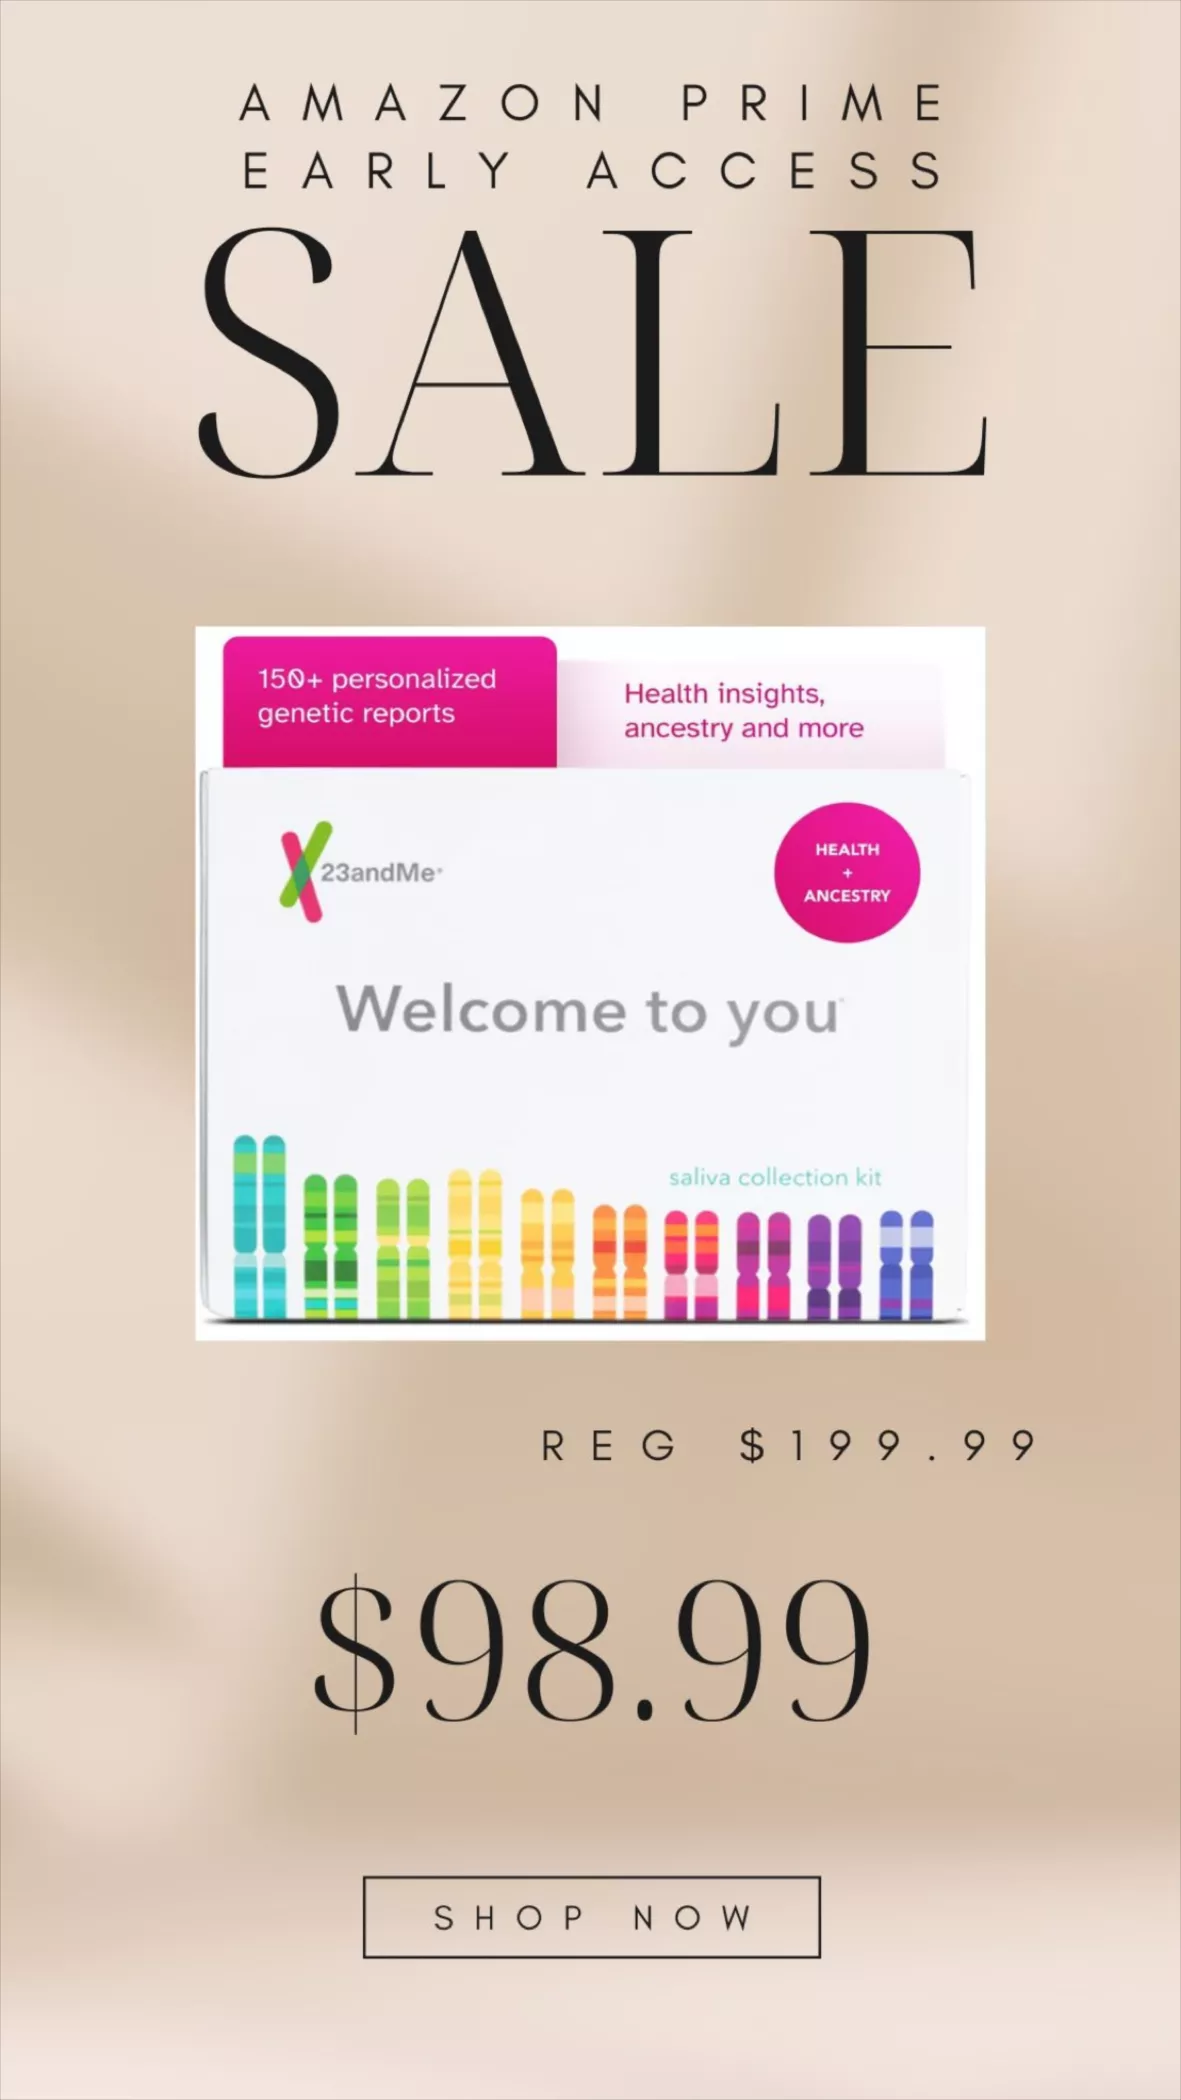 Cyber Monday DNA kit deal: 23andMe Ancestry test kit is 50% off